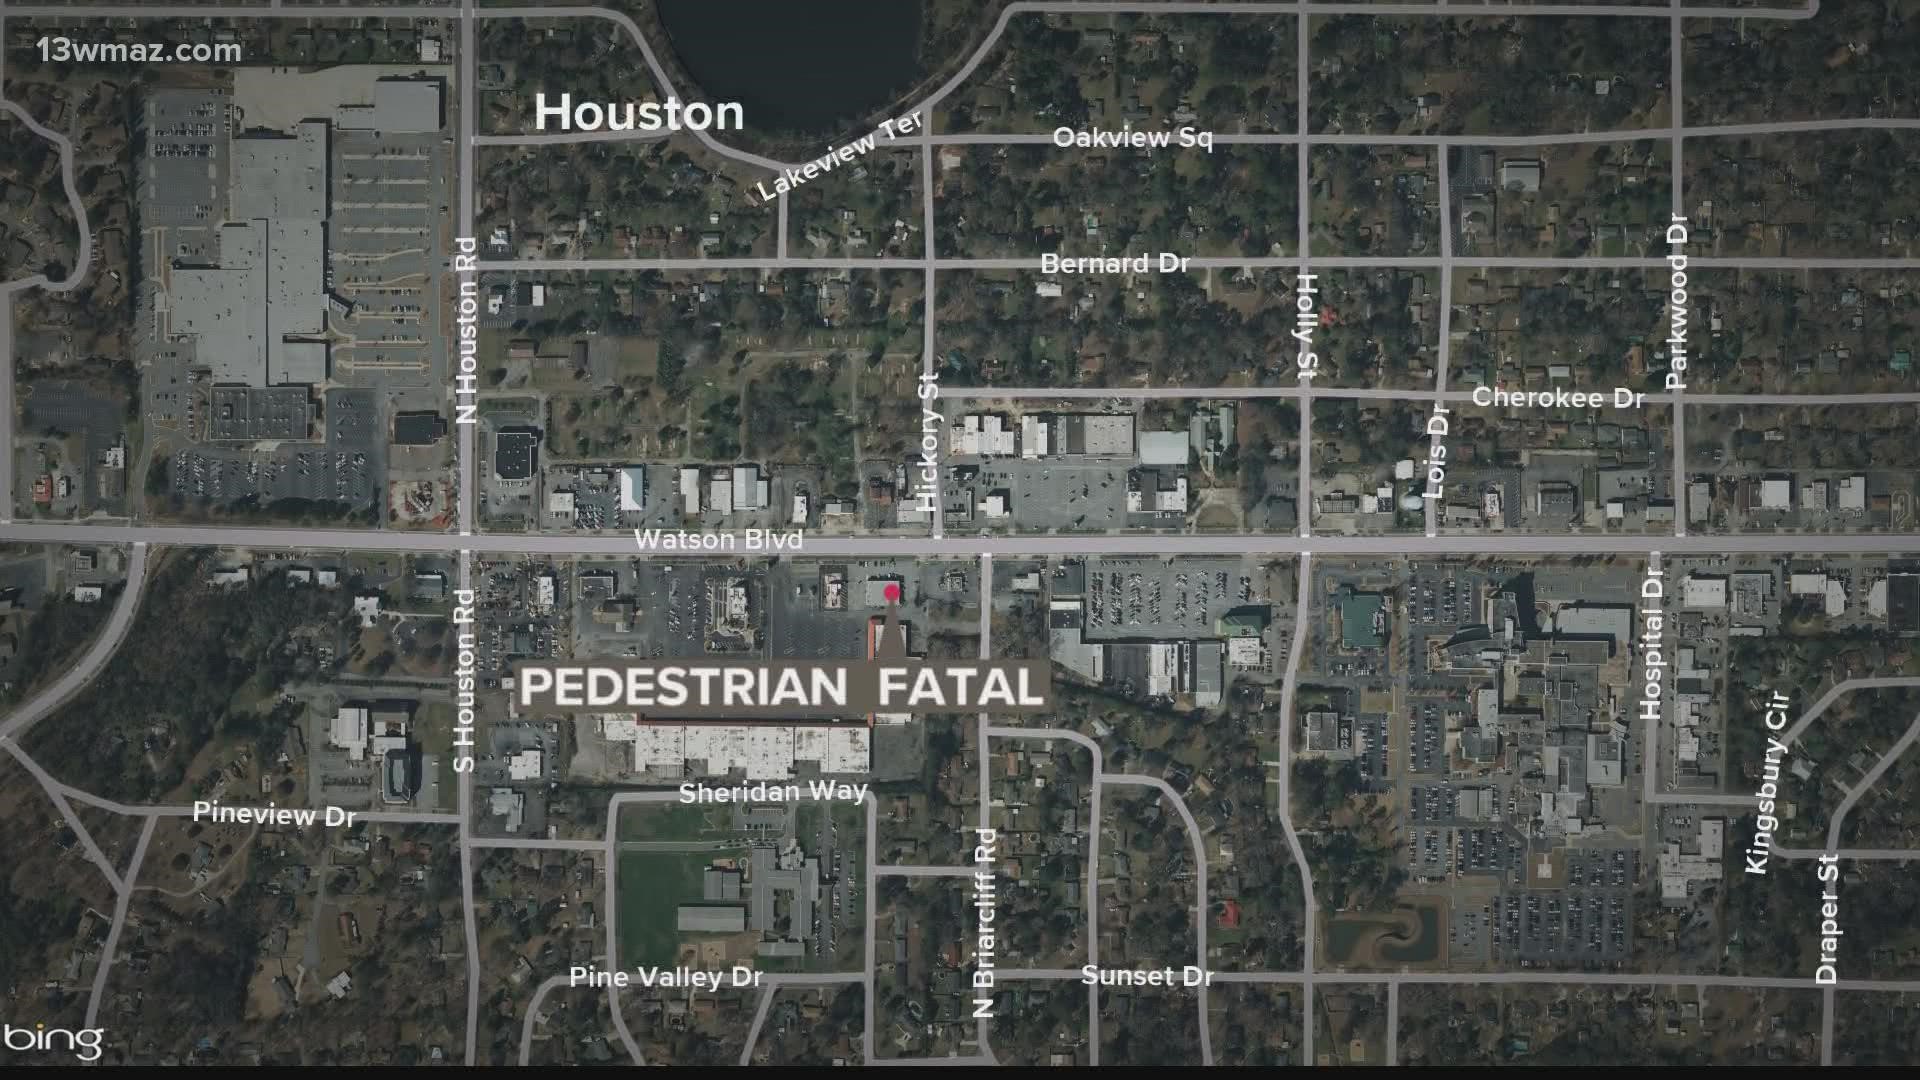 The man was hit just before 10 p.m. on Tuesday.